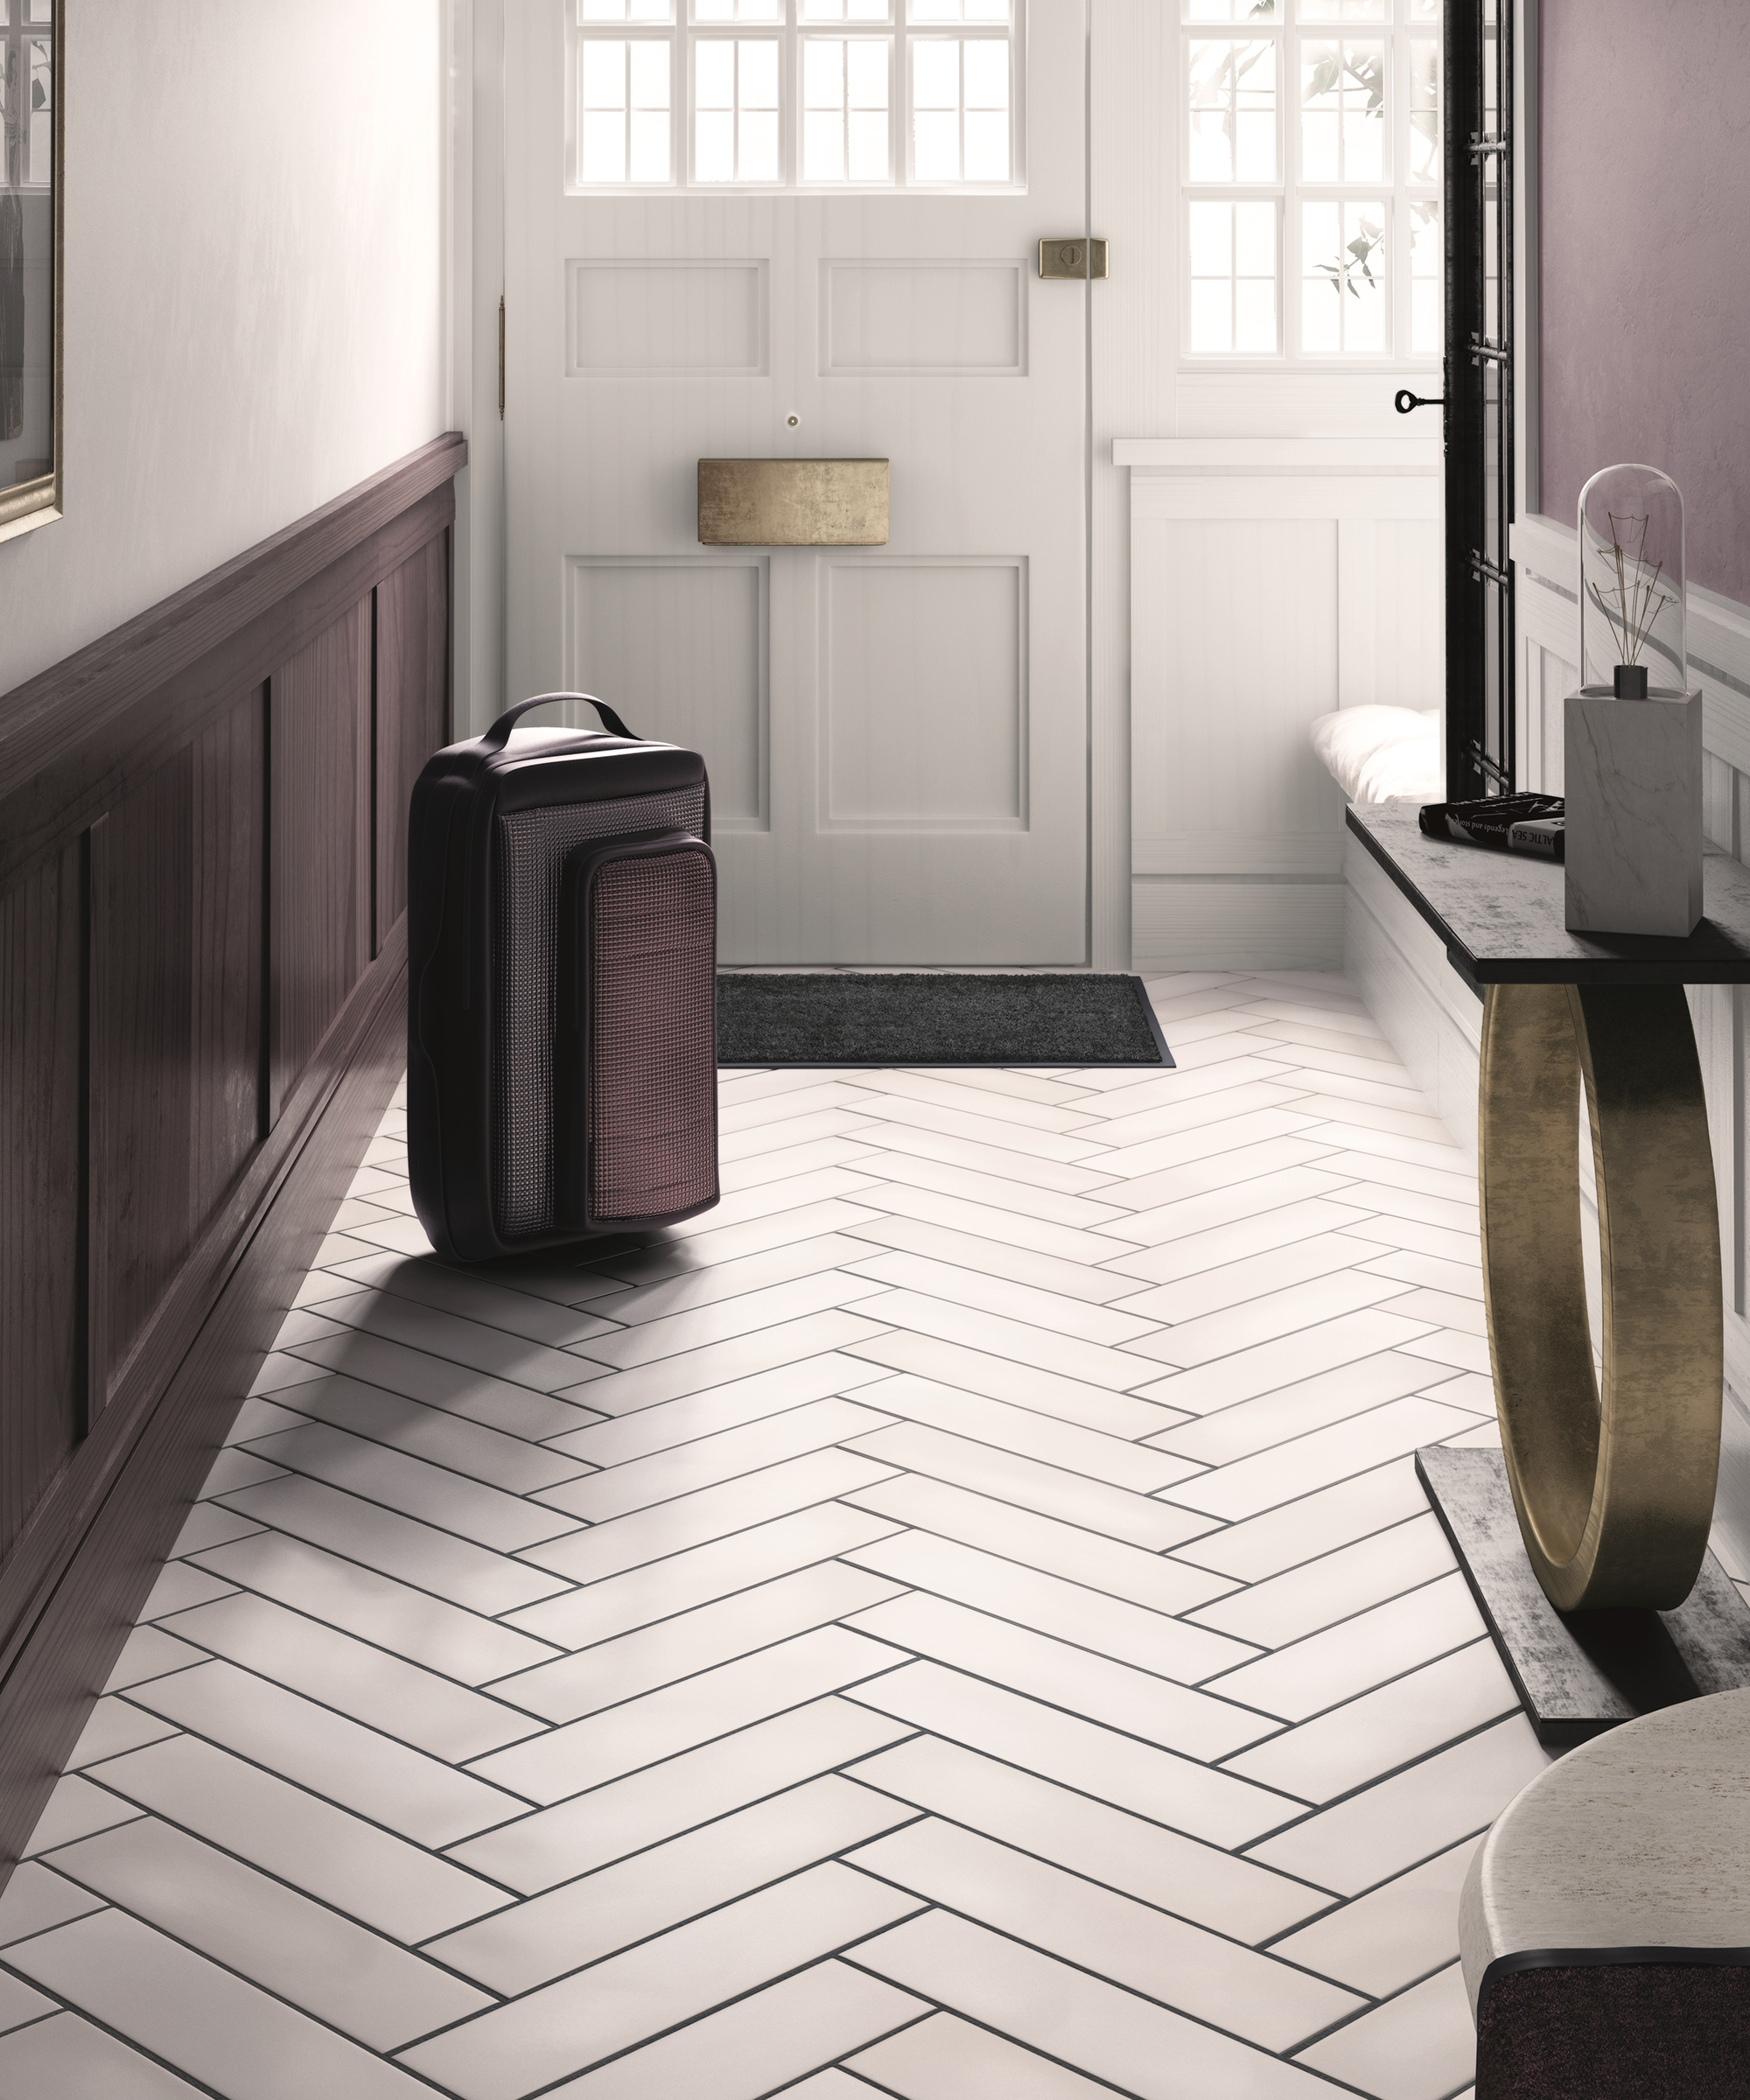 Hallway ideas by Porcelain Superstore using Flatiron white porcelain tiles and dark purple wall paneling